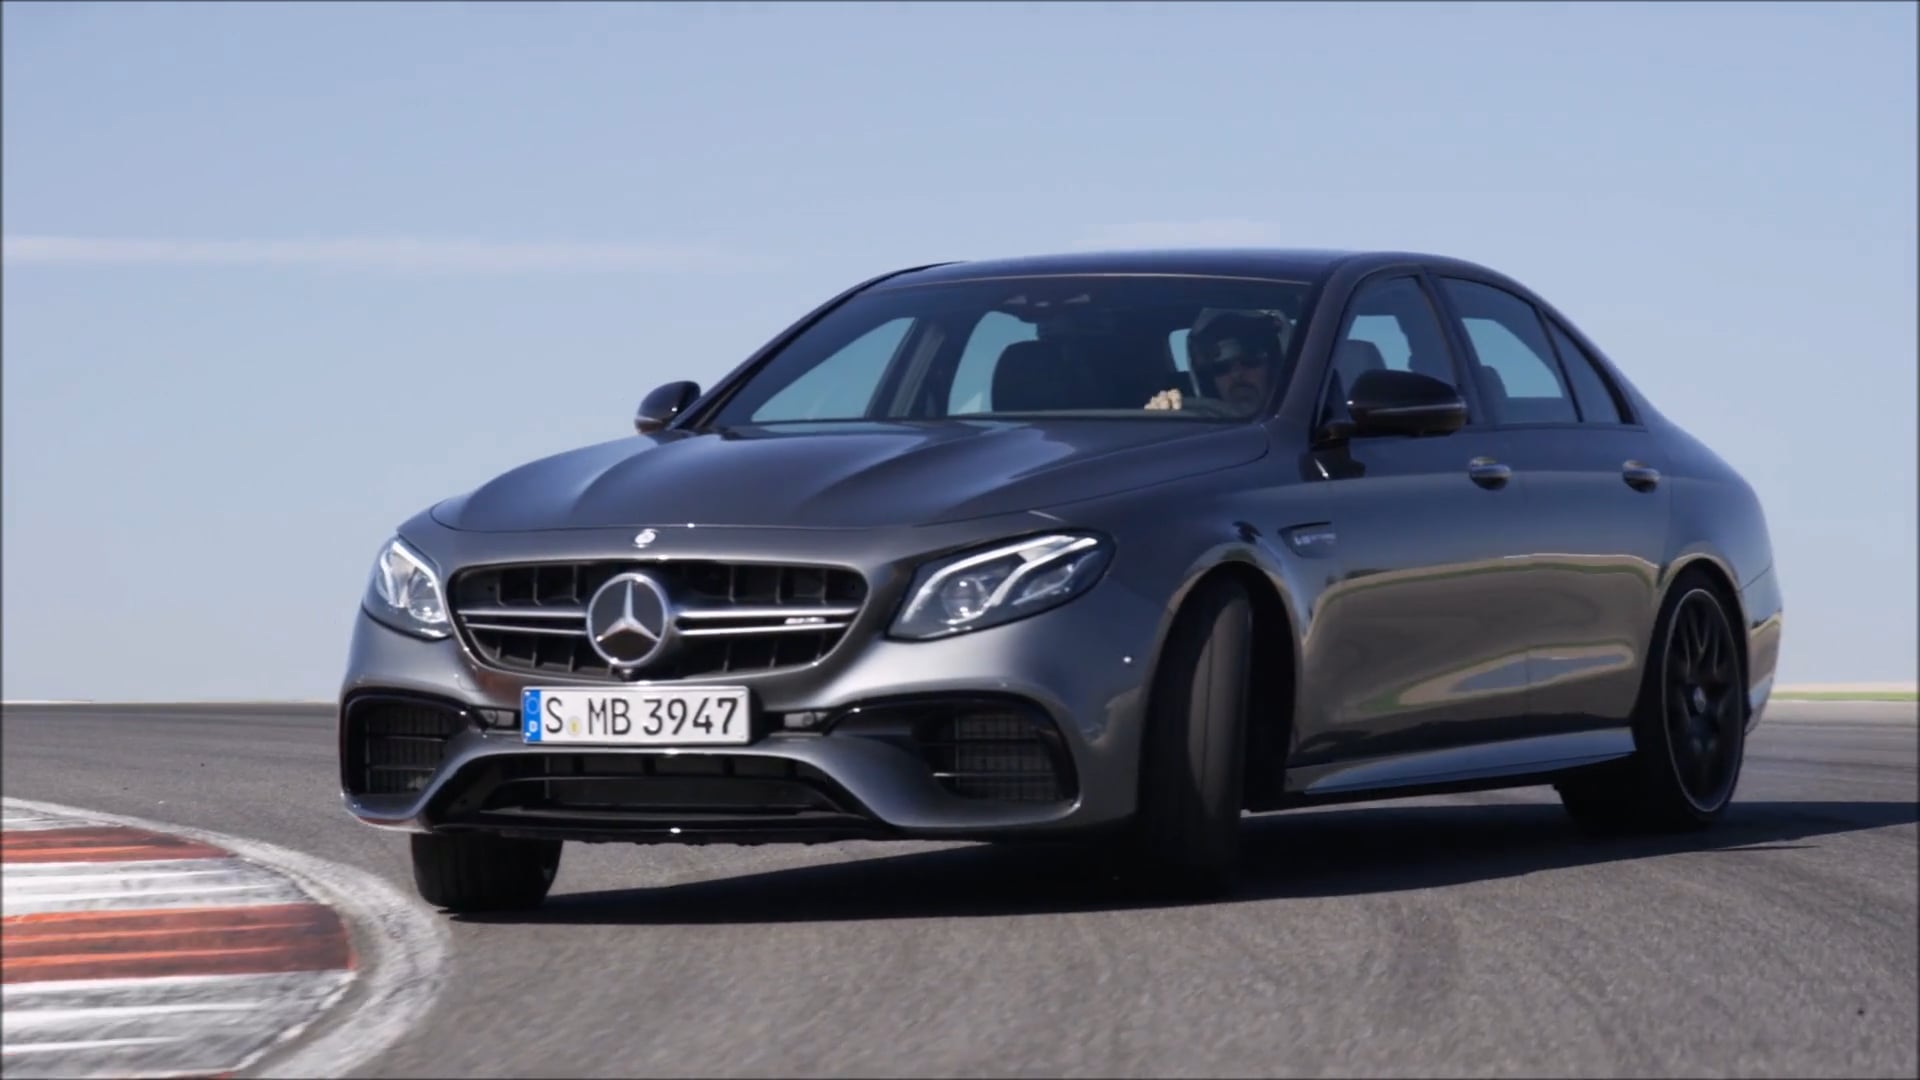 On Track: 2018 Mercedes-AMG E63 S 4MATIC+